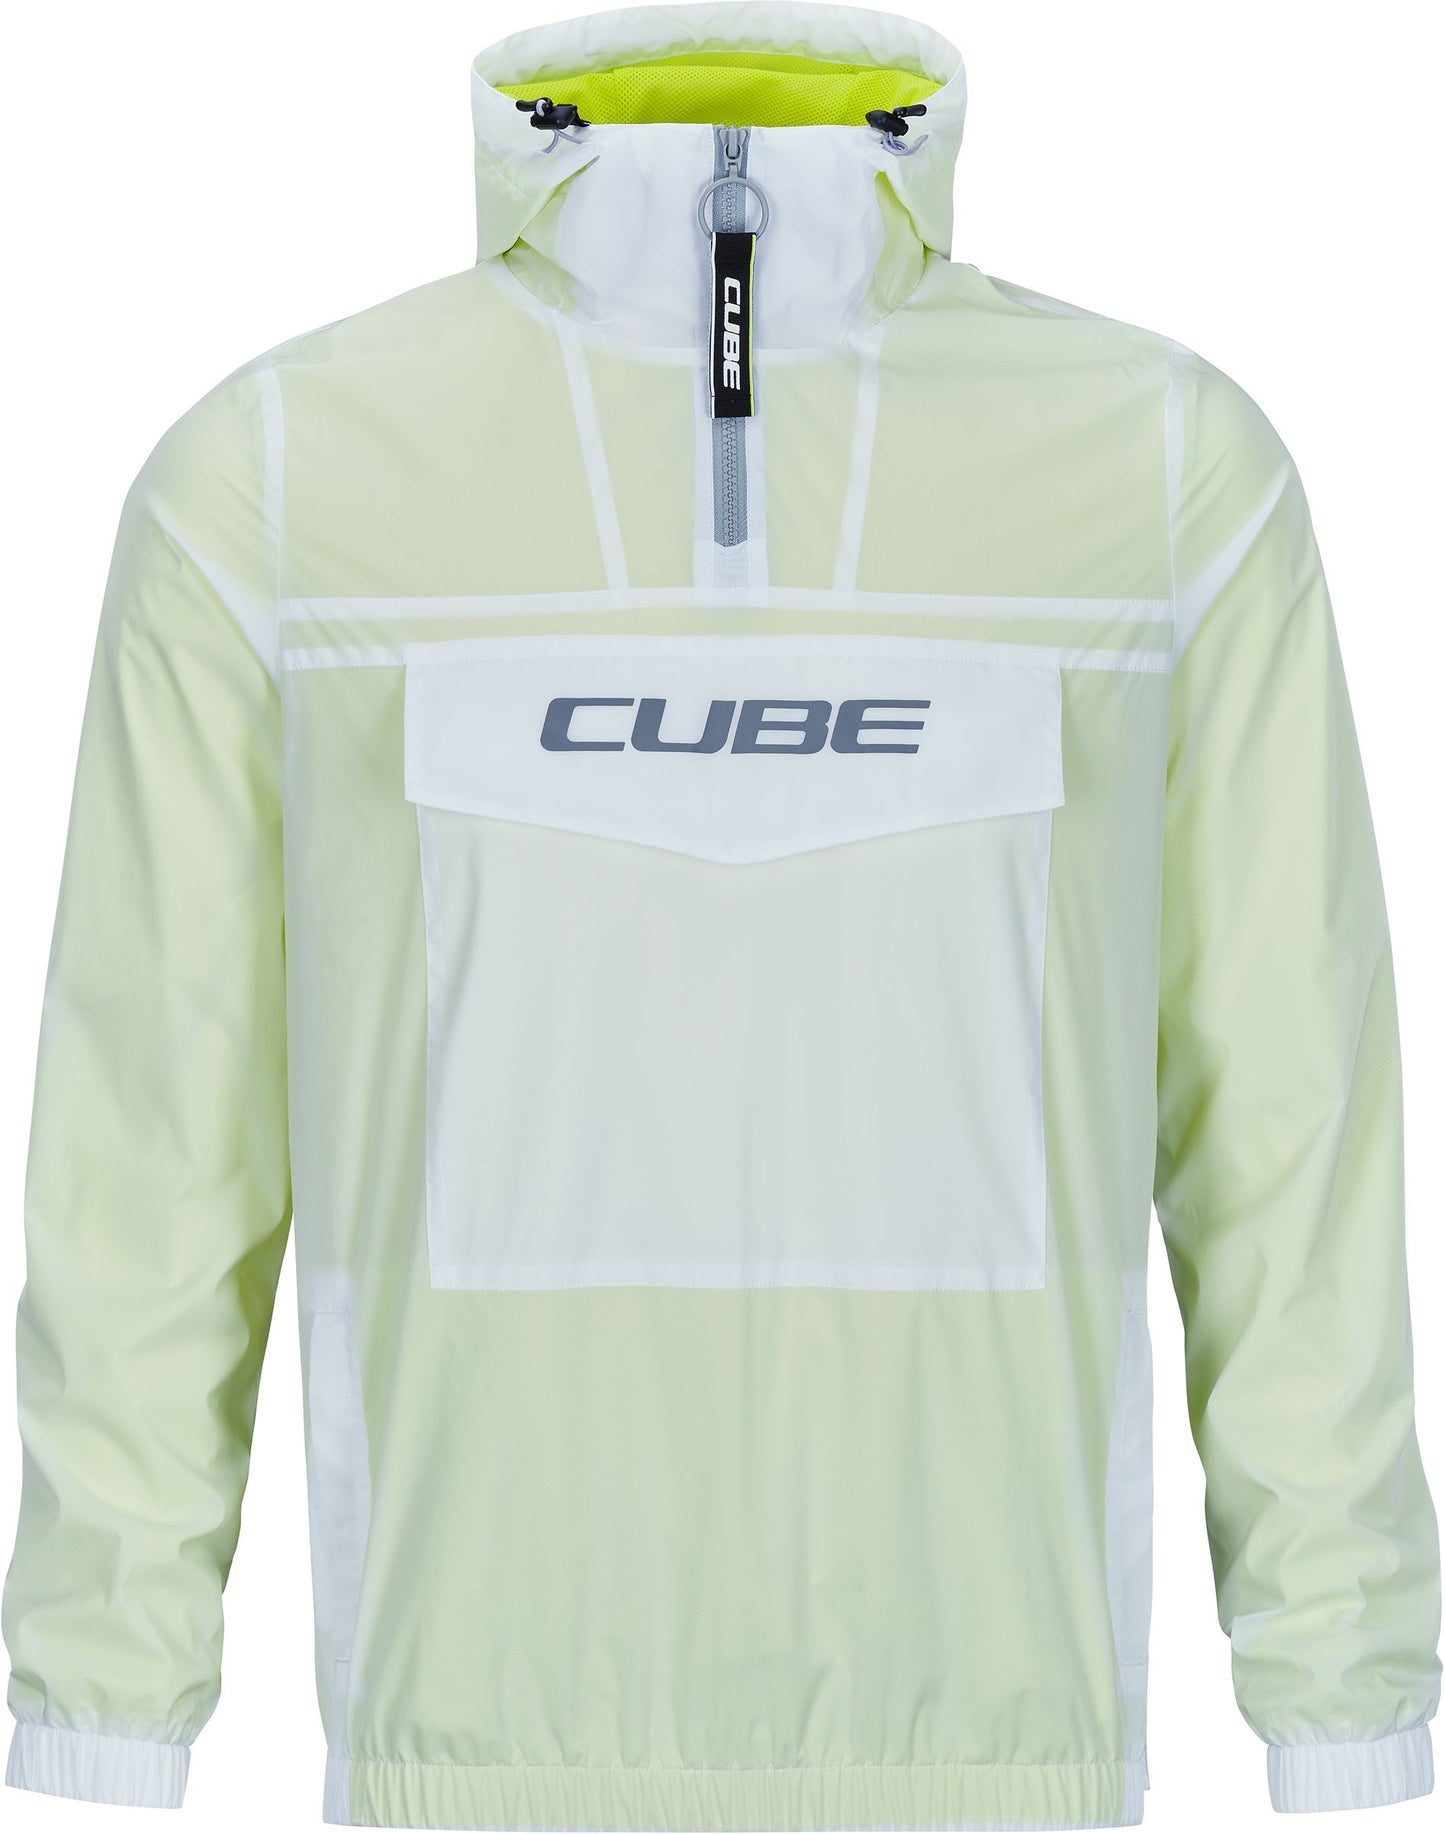 CUBE Pullover Jacket Grey/Neon Yellow